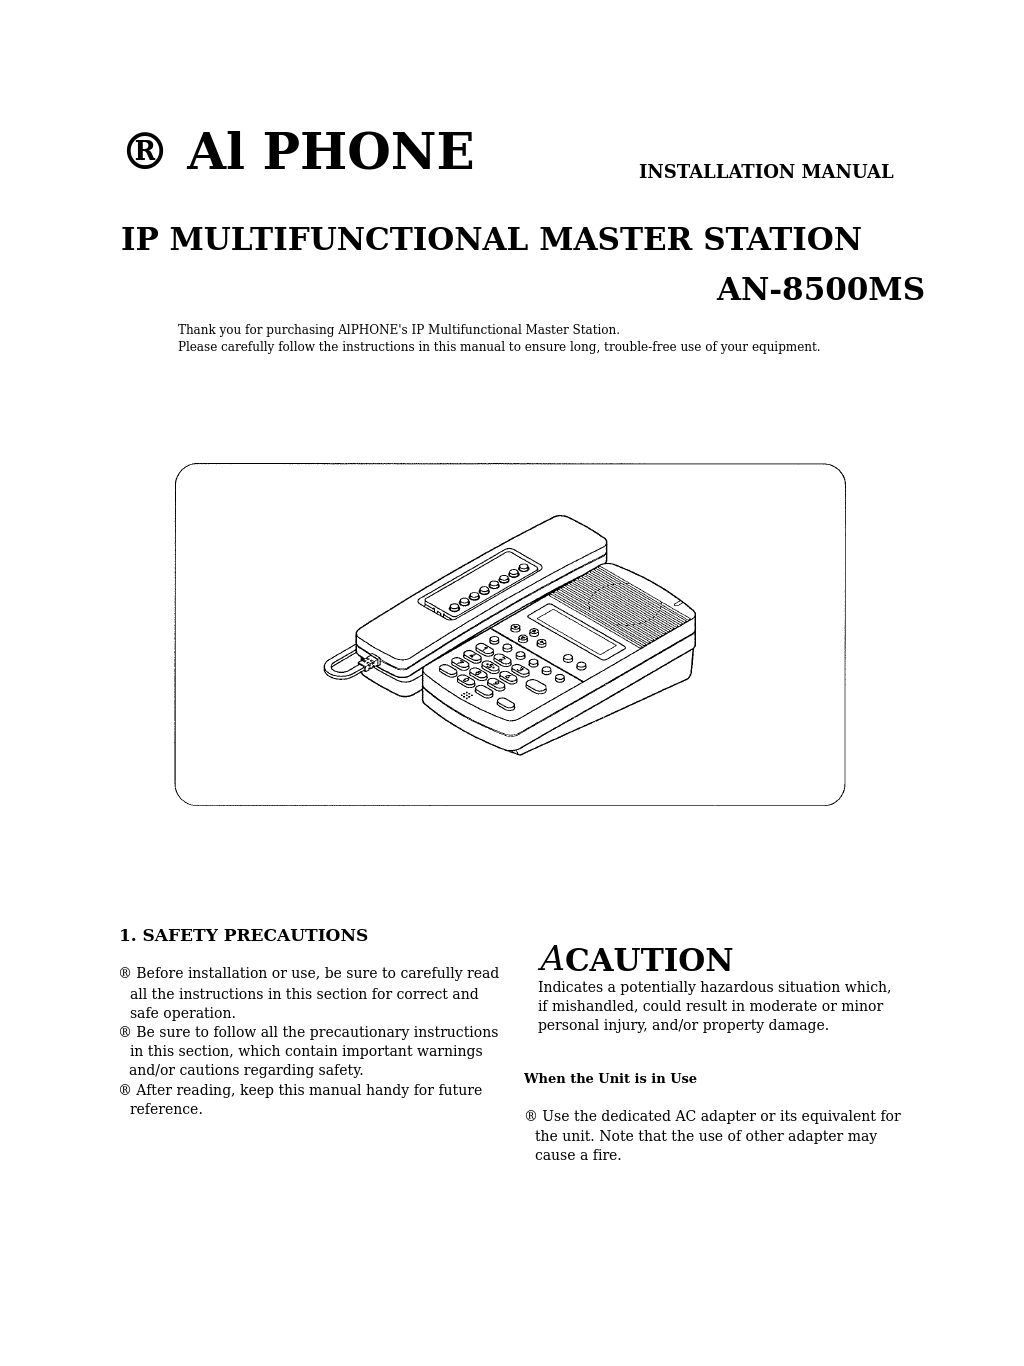 IP MULTIFUNCTIONAL MASTER STATION AN-8500MS